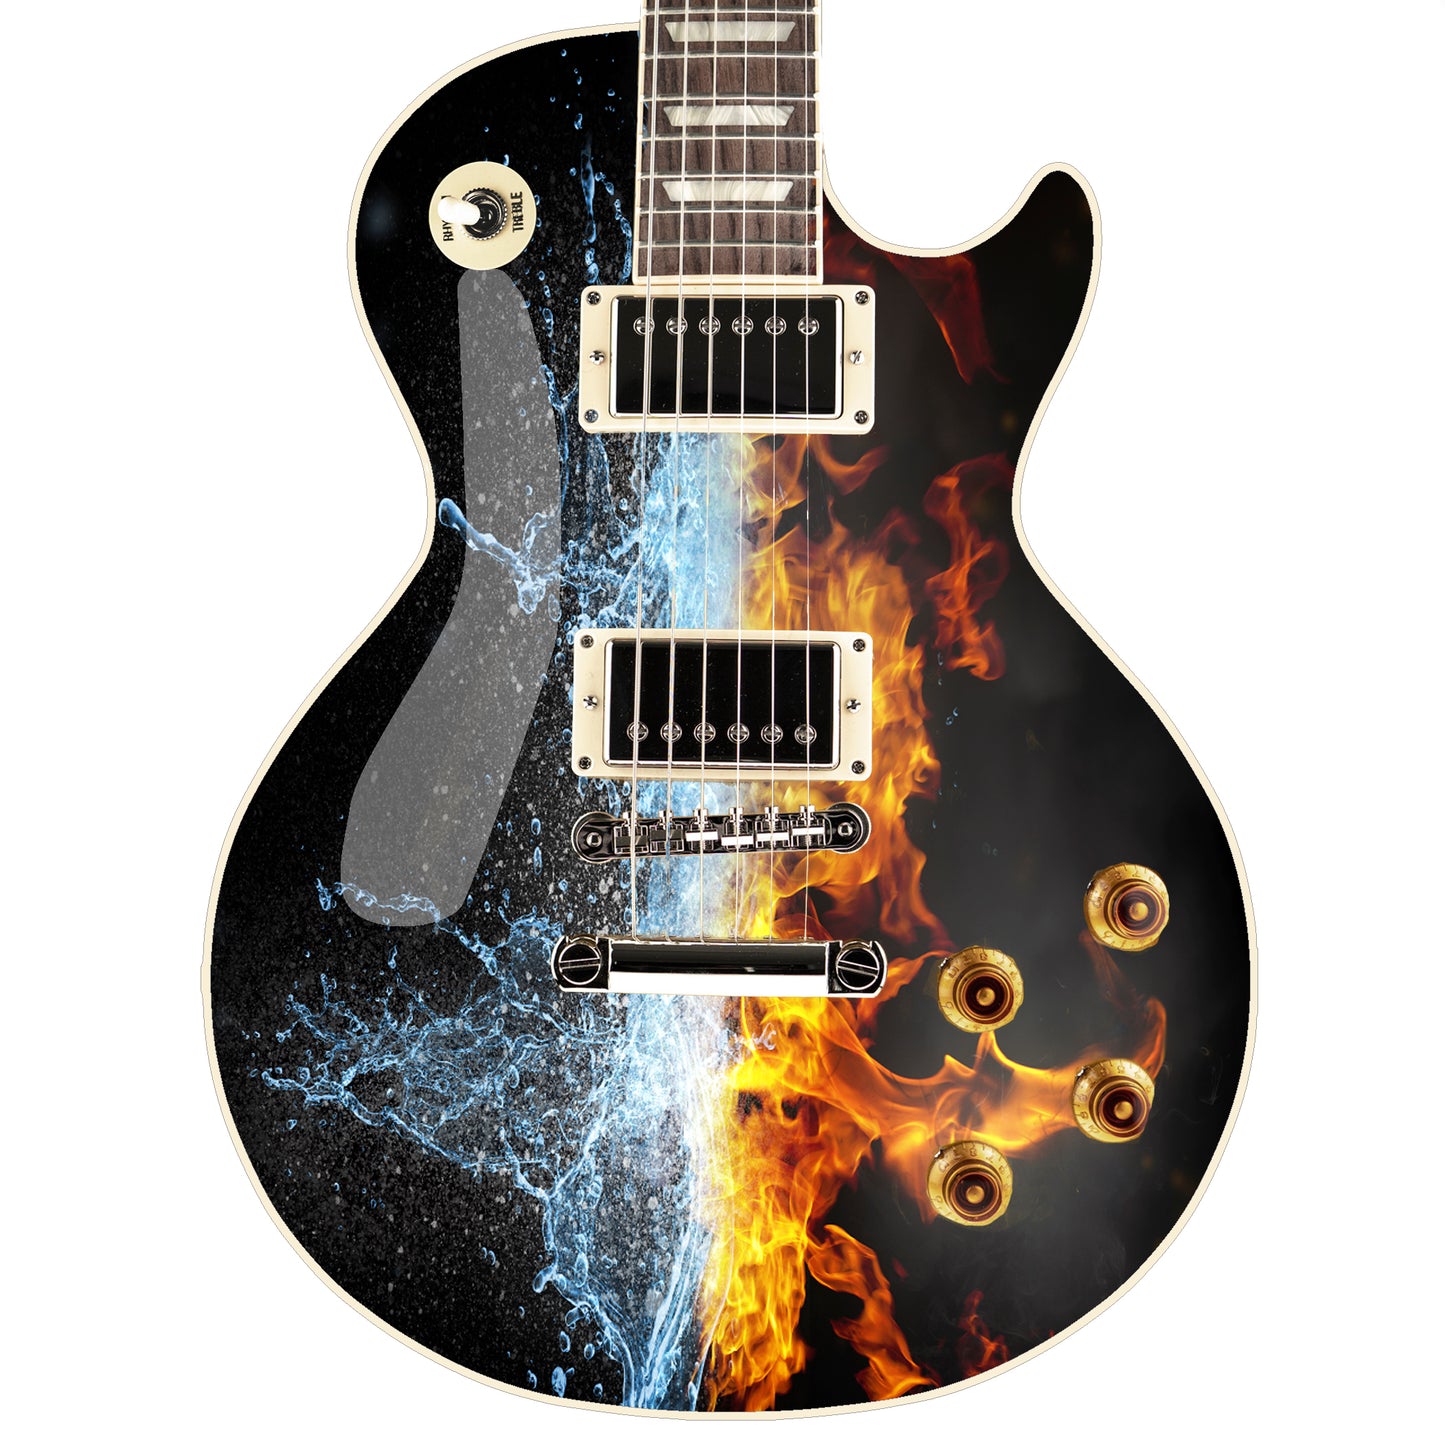 Guitar, Bass or Acoustic Skin Wrap Laminated Vinyl Decal Sticker The Fire Water GS68